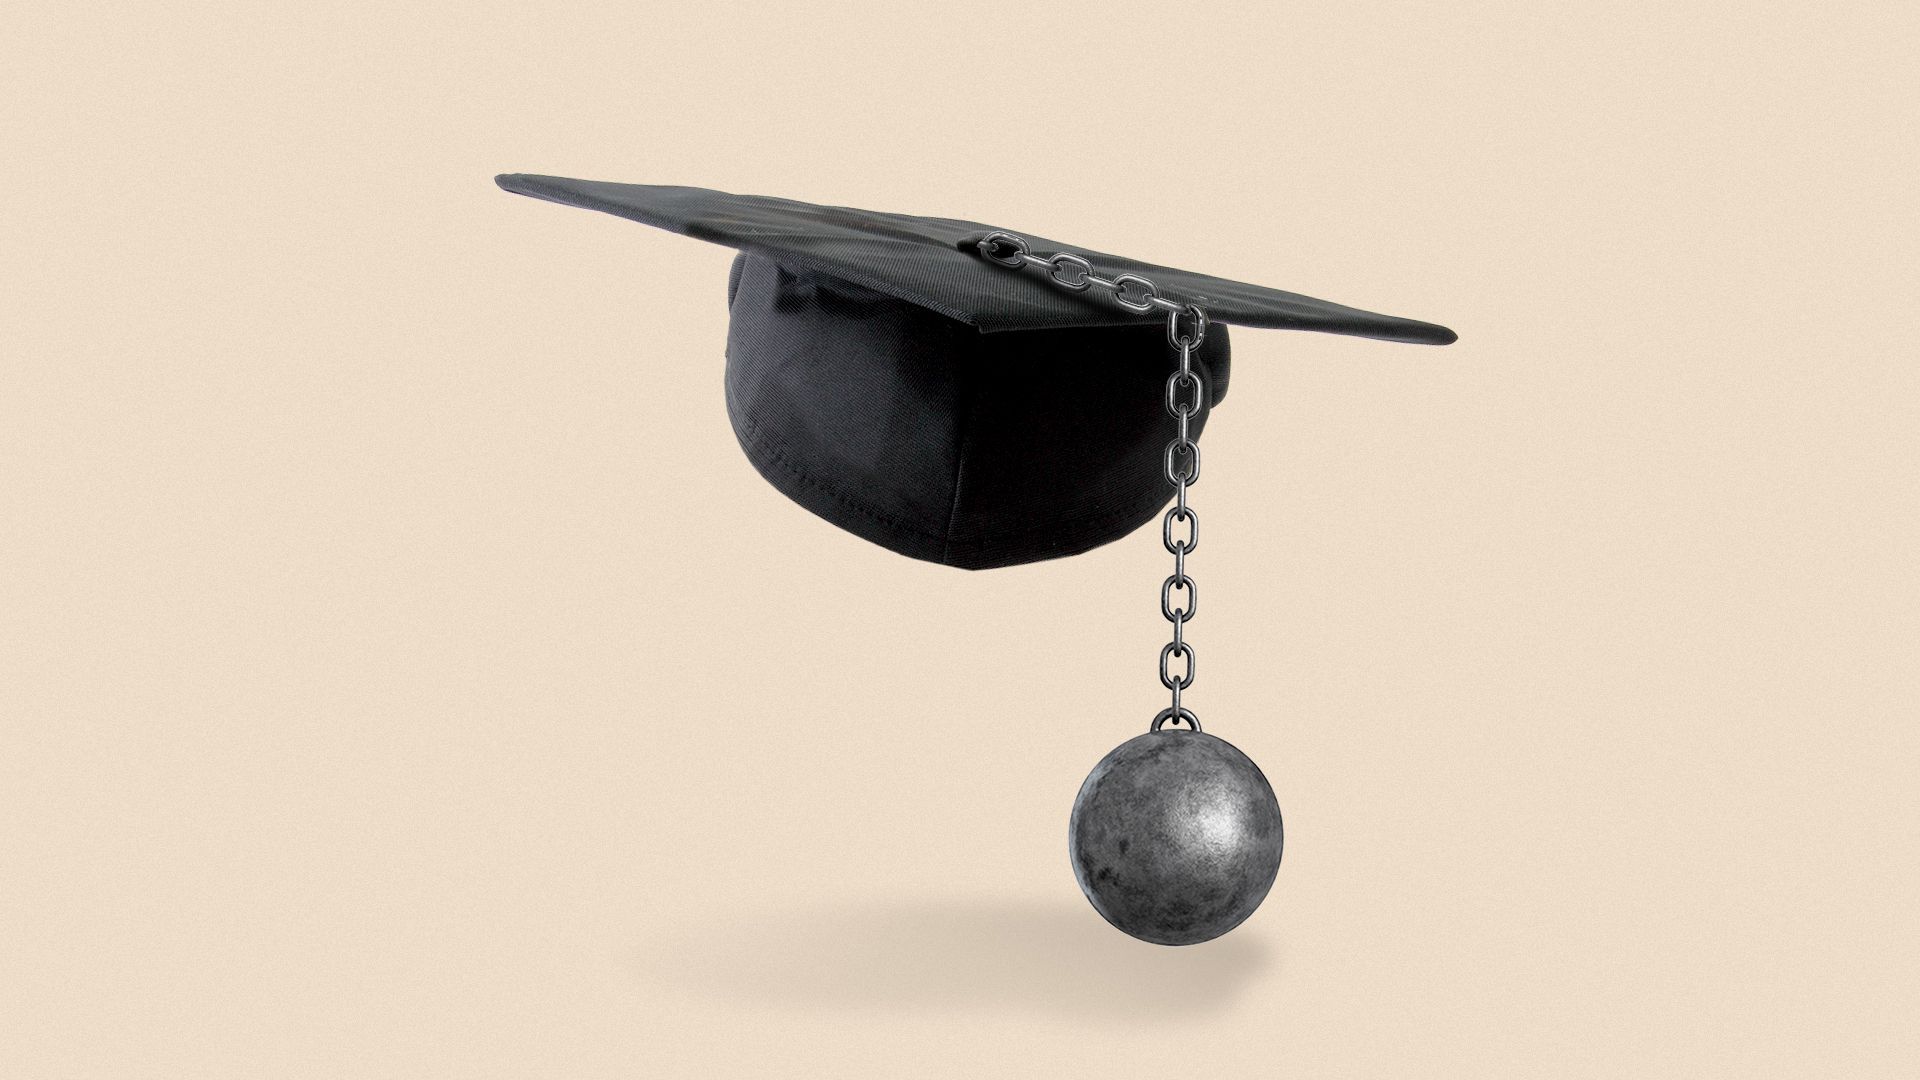 Illustration of a graduation cap being weighed down by a ball and chain as the tassel.